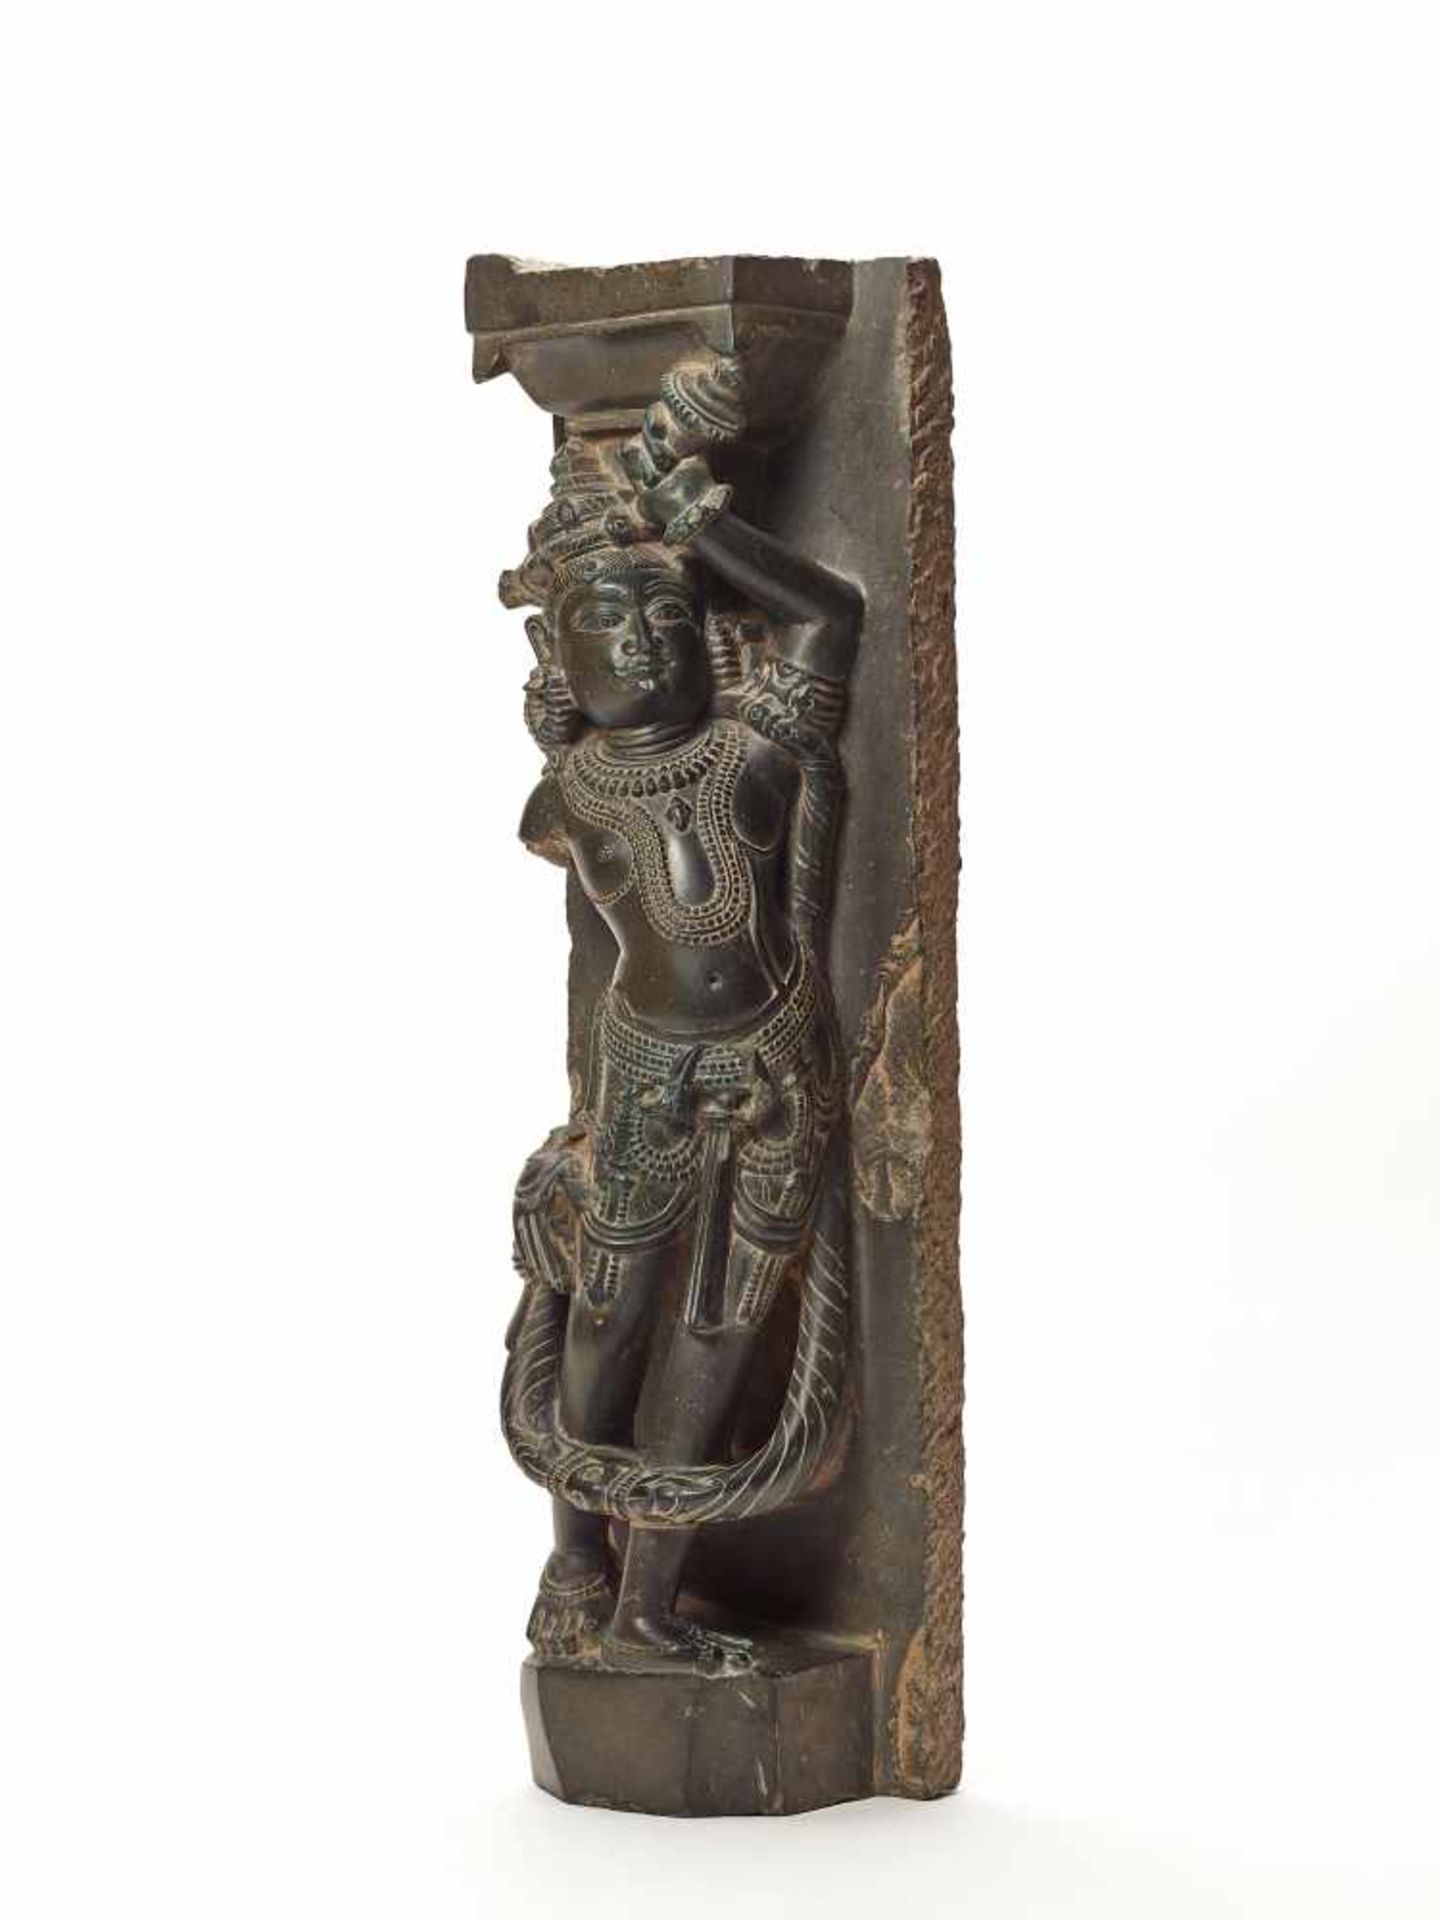 A BLACK STONE STATUE OF A STANDING GODDESS, INDIA ca. 18TH CENTURYThe crowned and bejeweled - Image 4 of 7